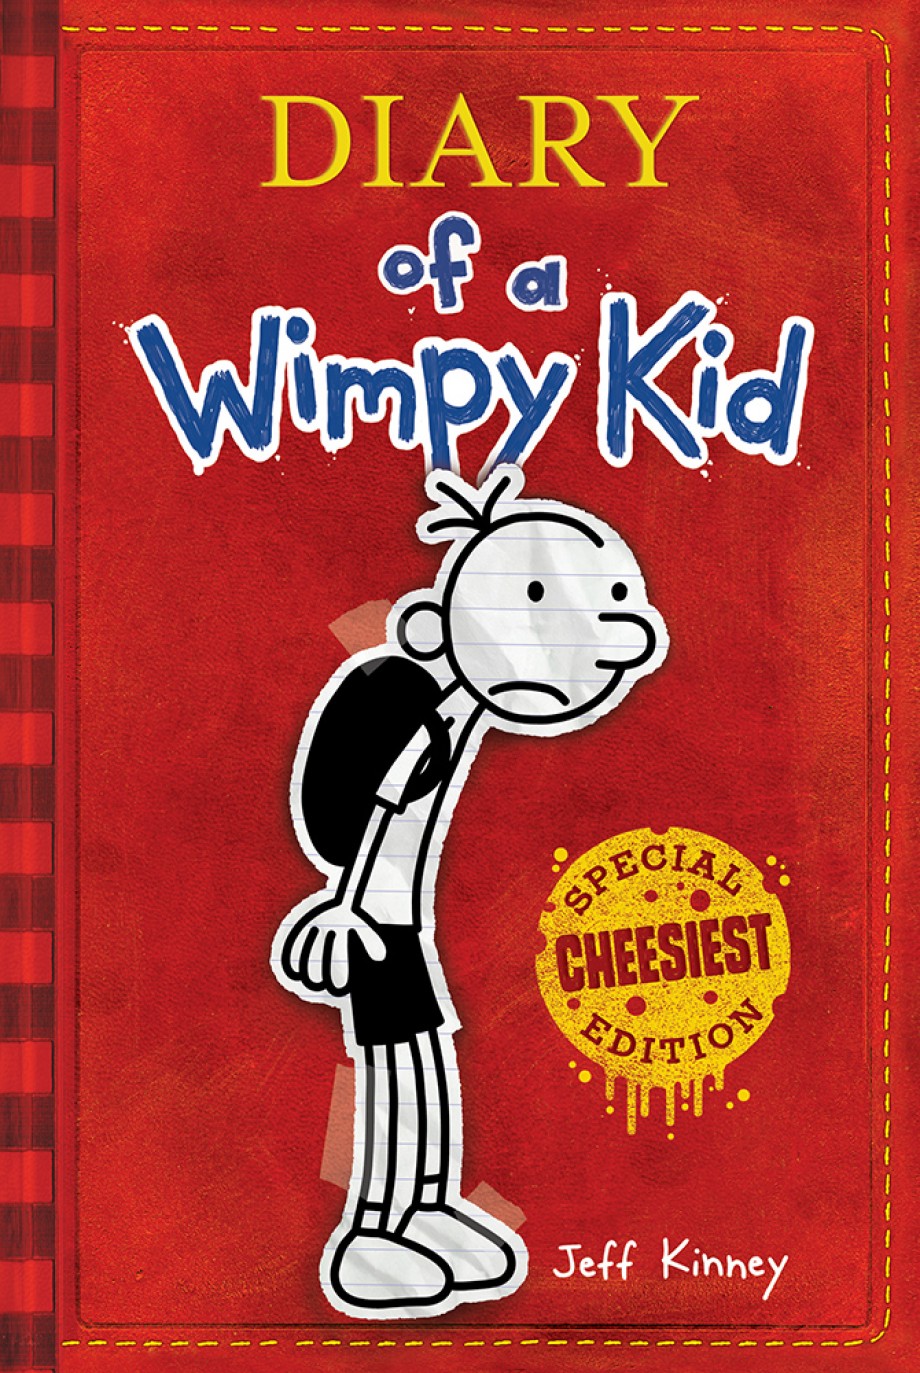 Diary of a Wimpy Kid (Hardcover) ABRAMS